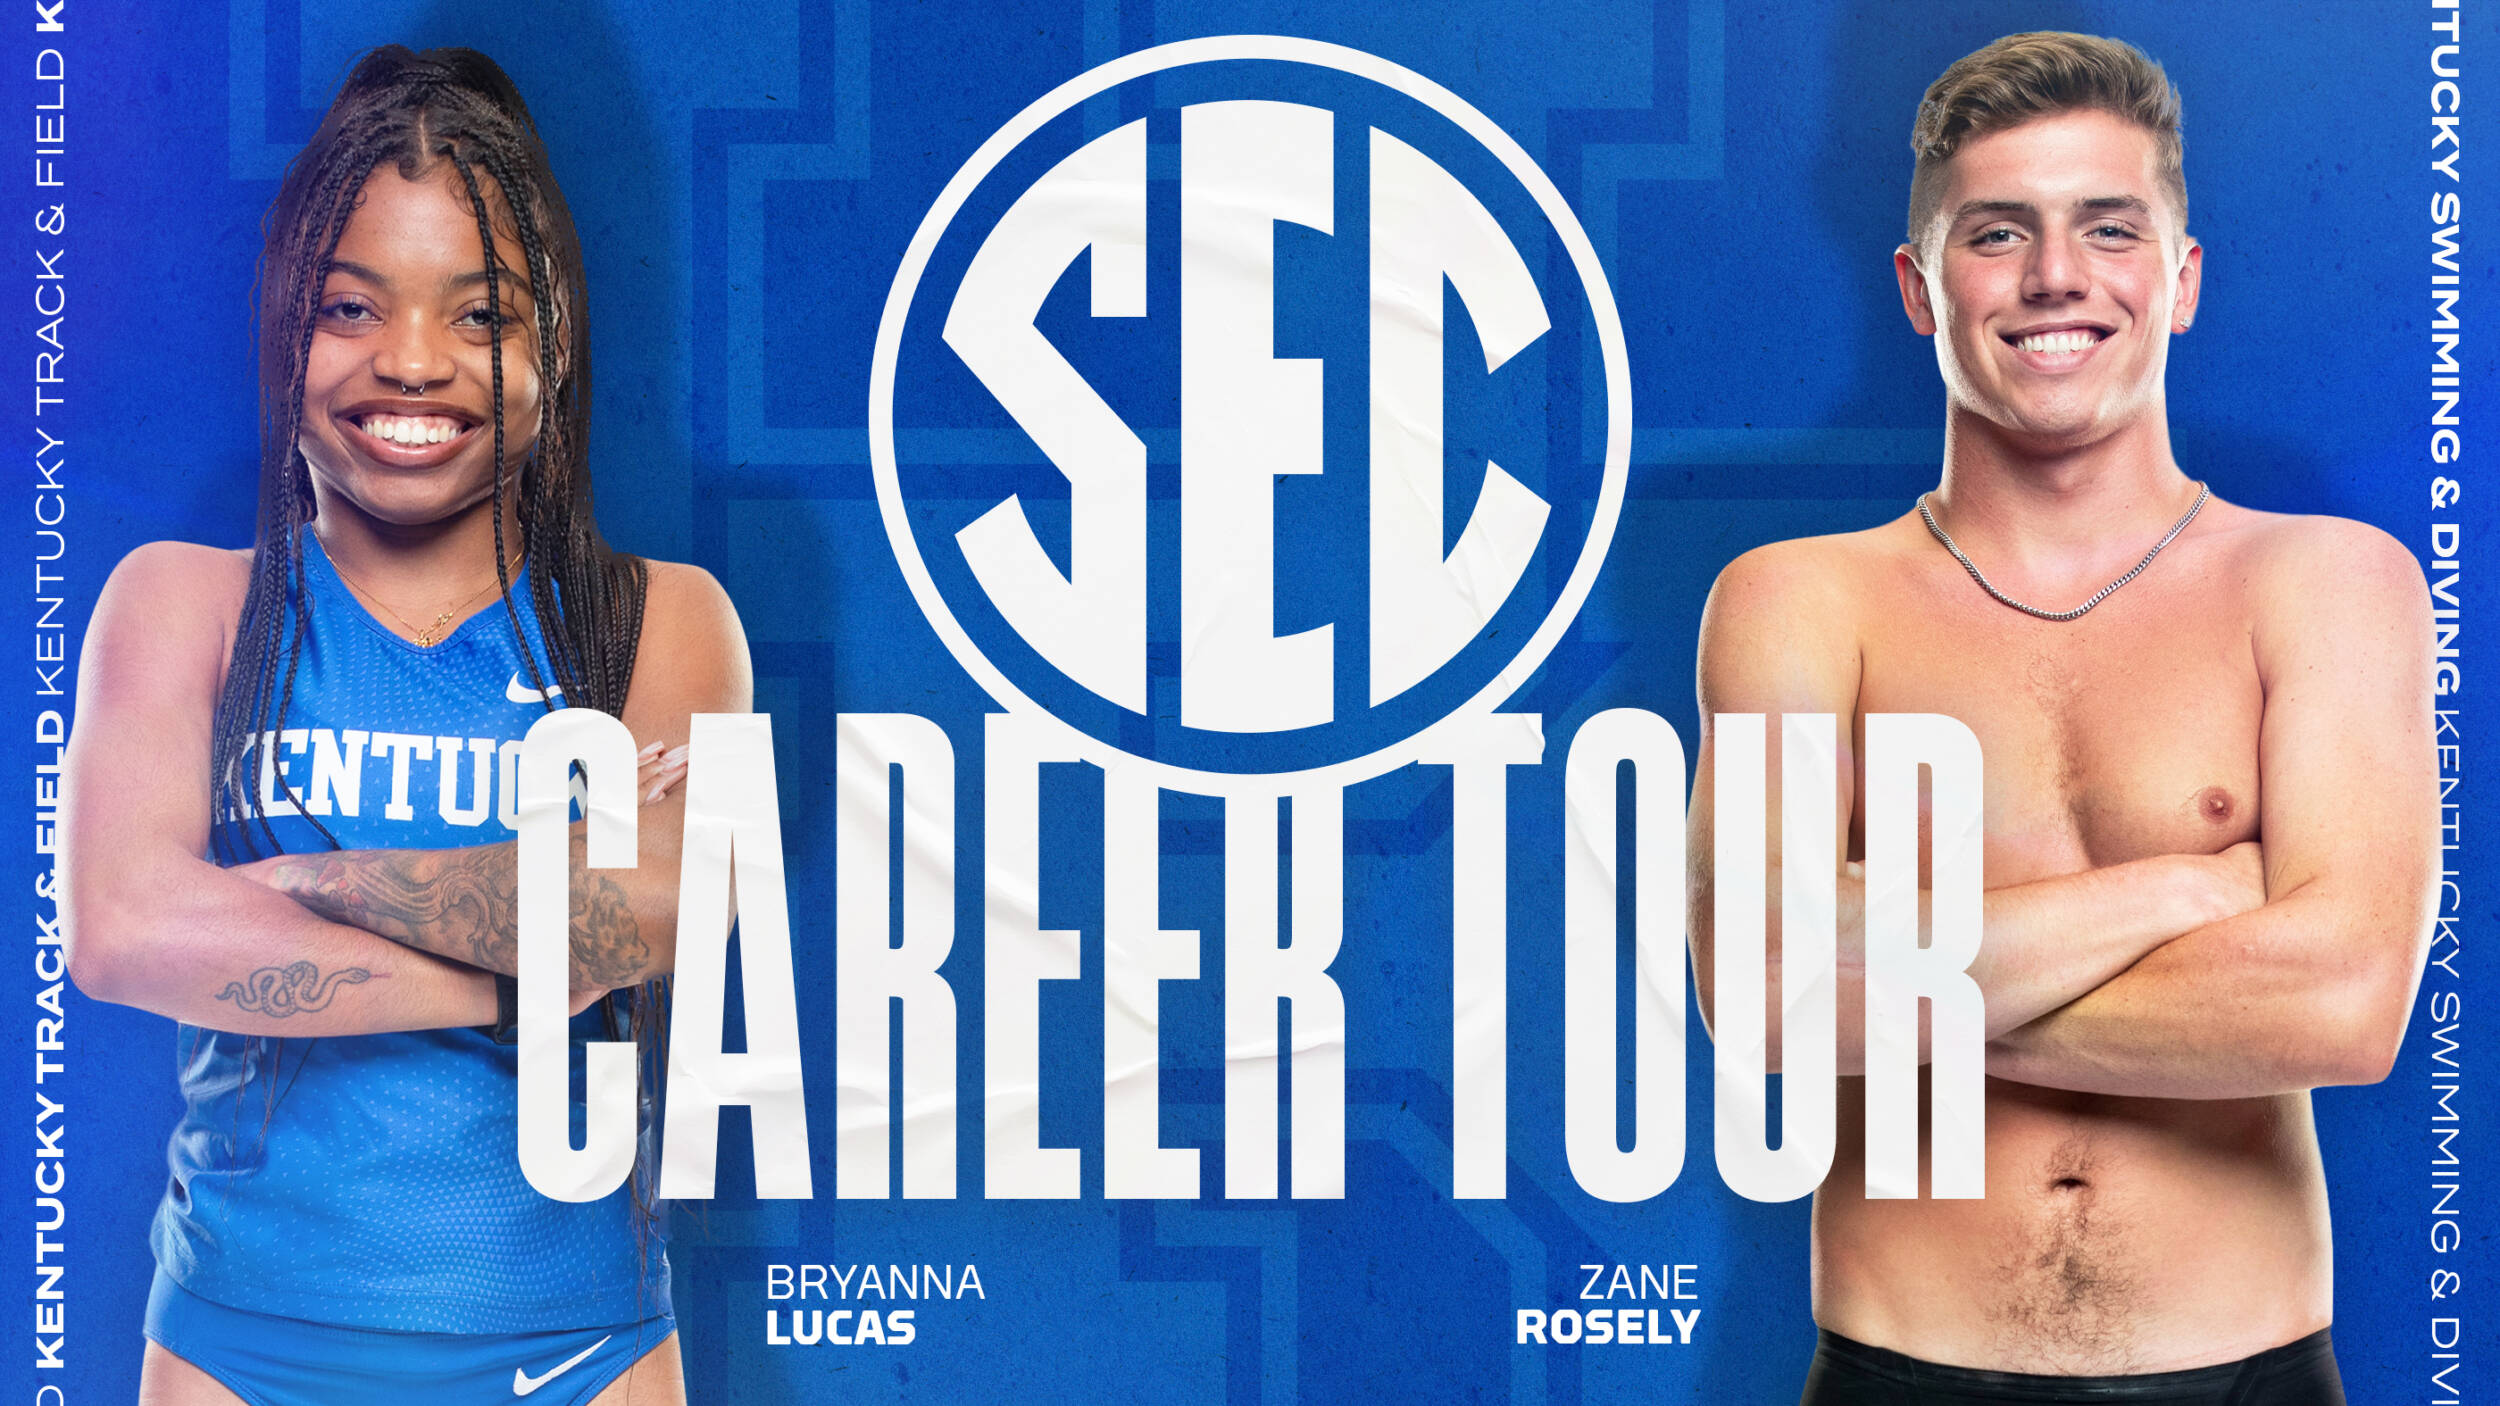 Bryanna Lucas, Zane Rosely to Participate in SEC Career Tour